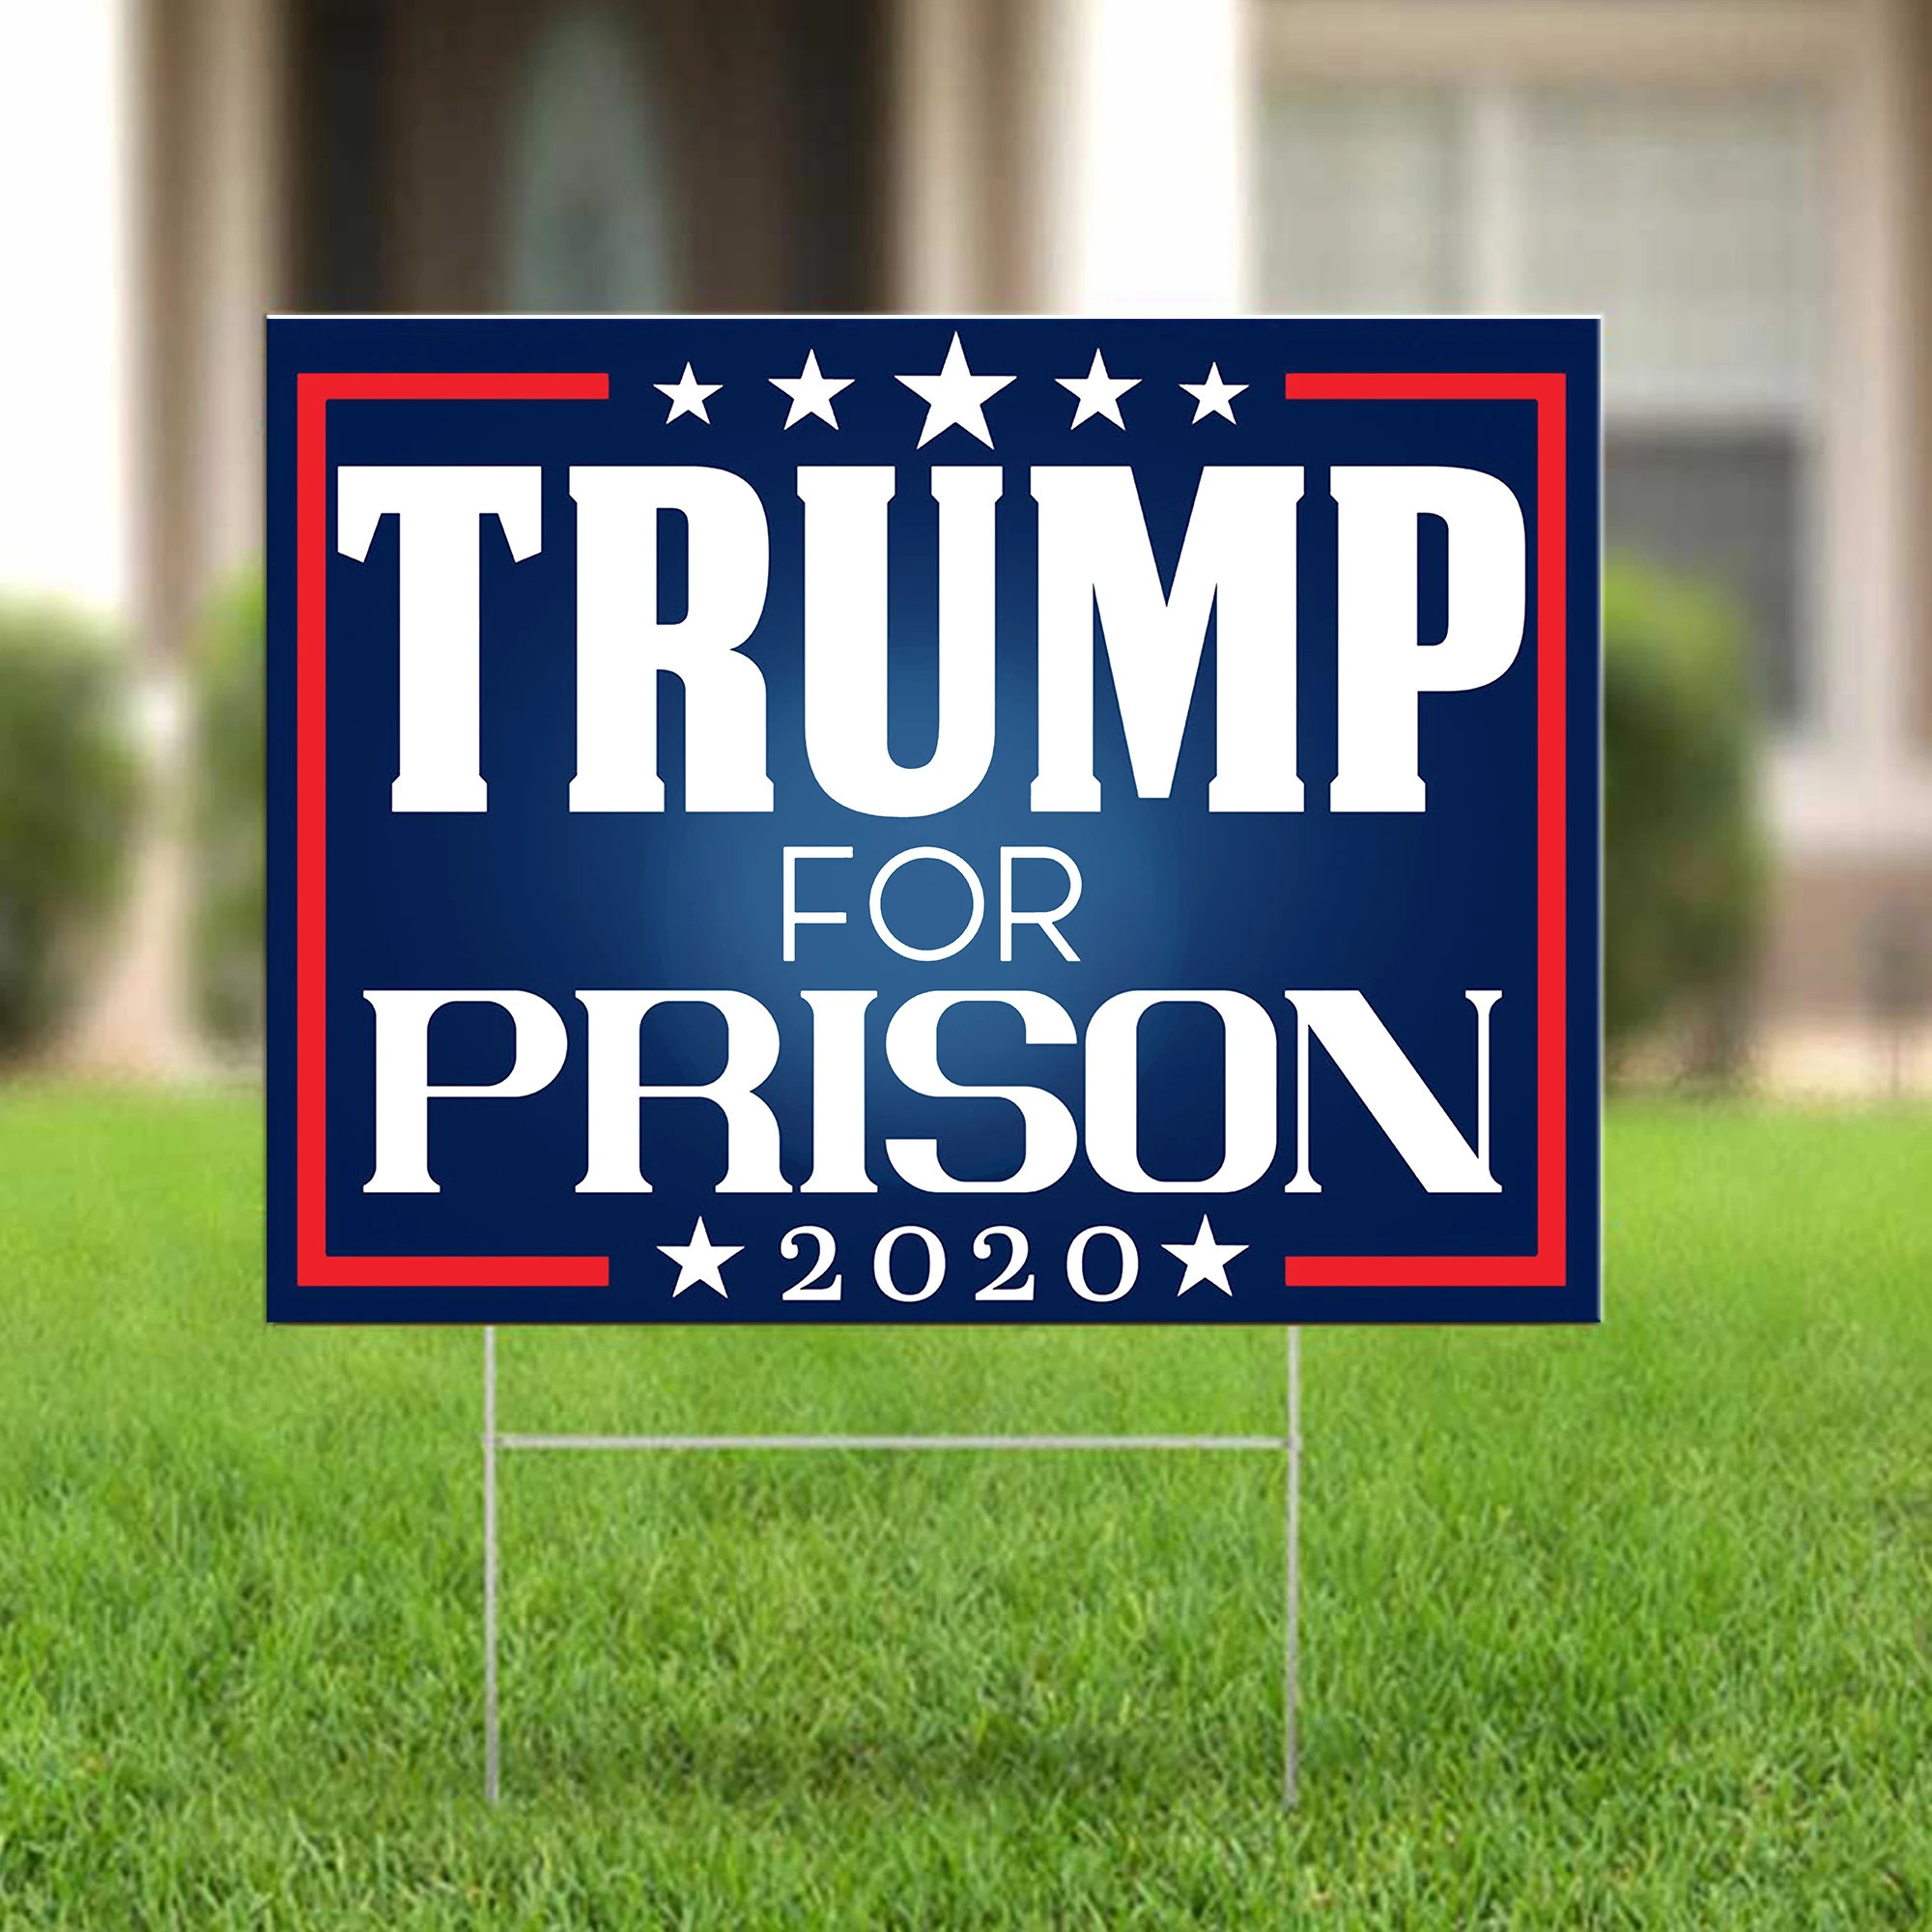 Trump For Prison 2020 Yard Sign Funny Anti Trump Gifts For Home Decor